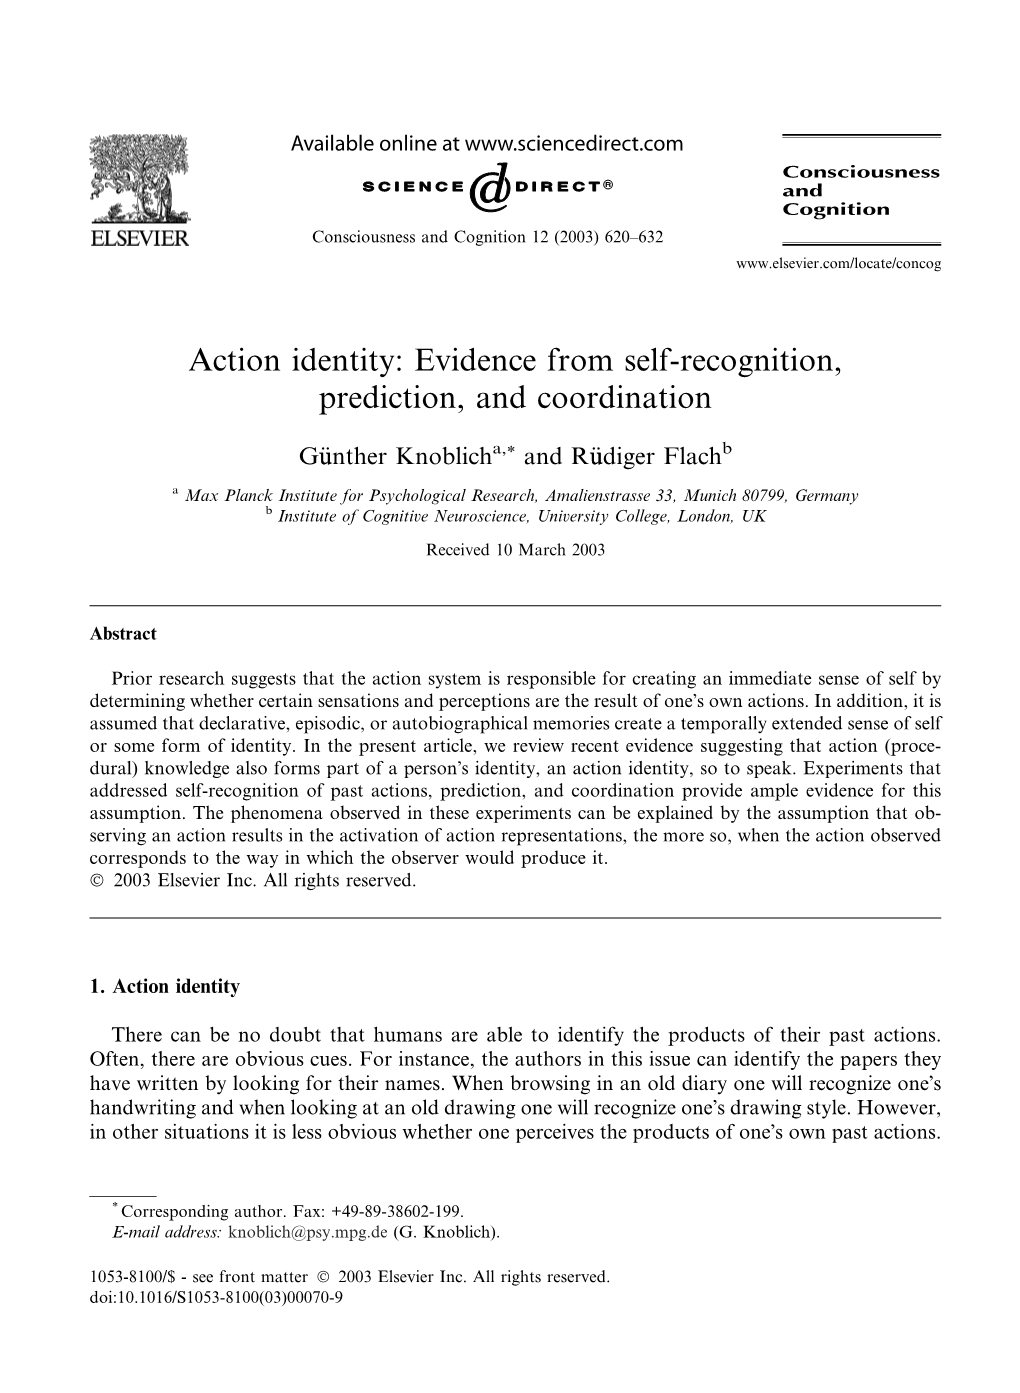 Evidence from Self-Recognition, Prediction, and Coordination